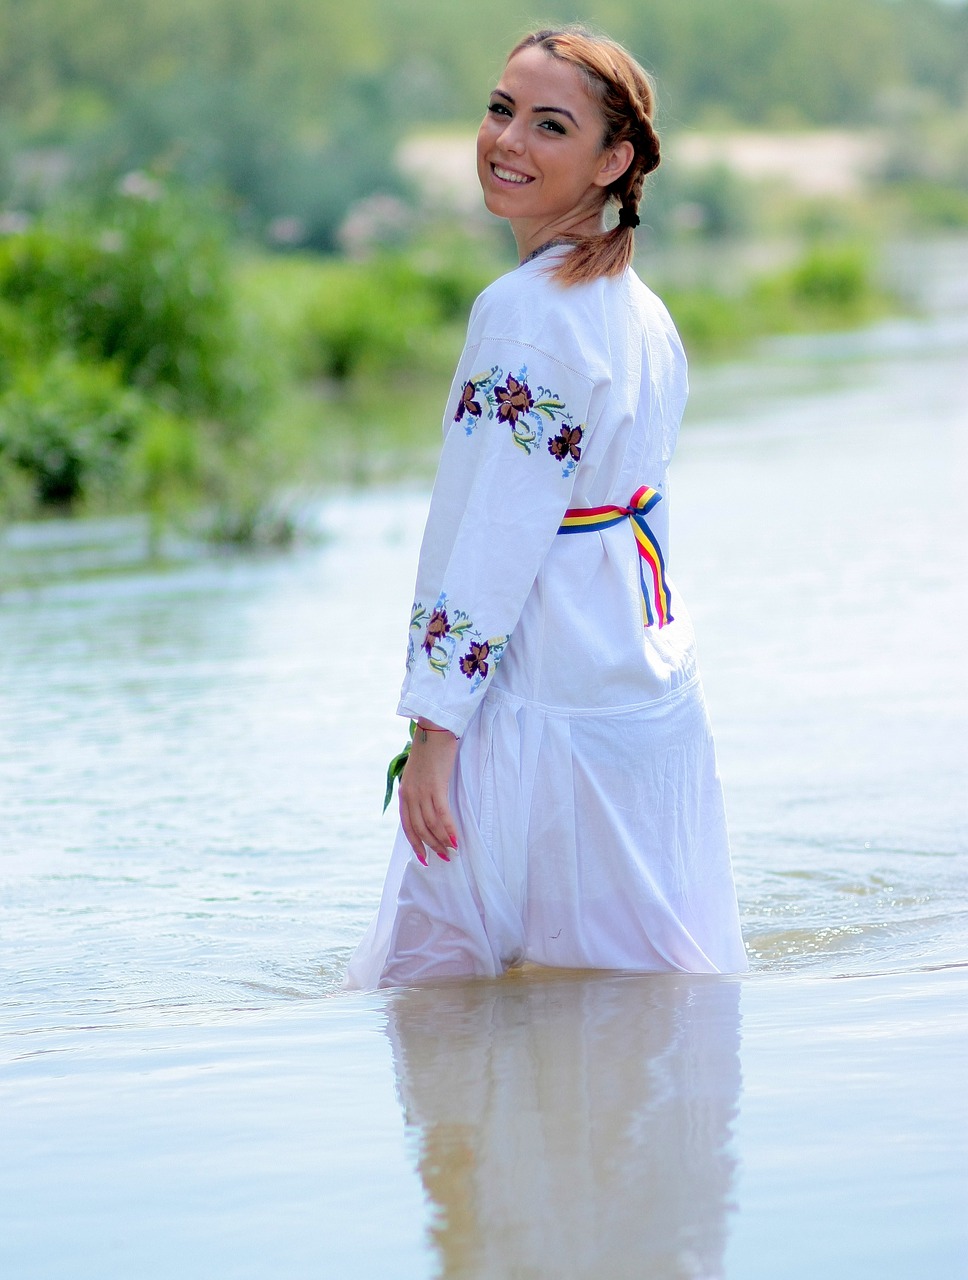 girl peasant woman tradition free photo